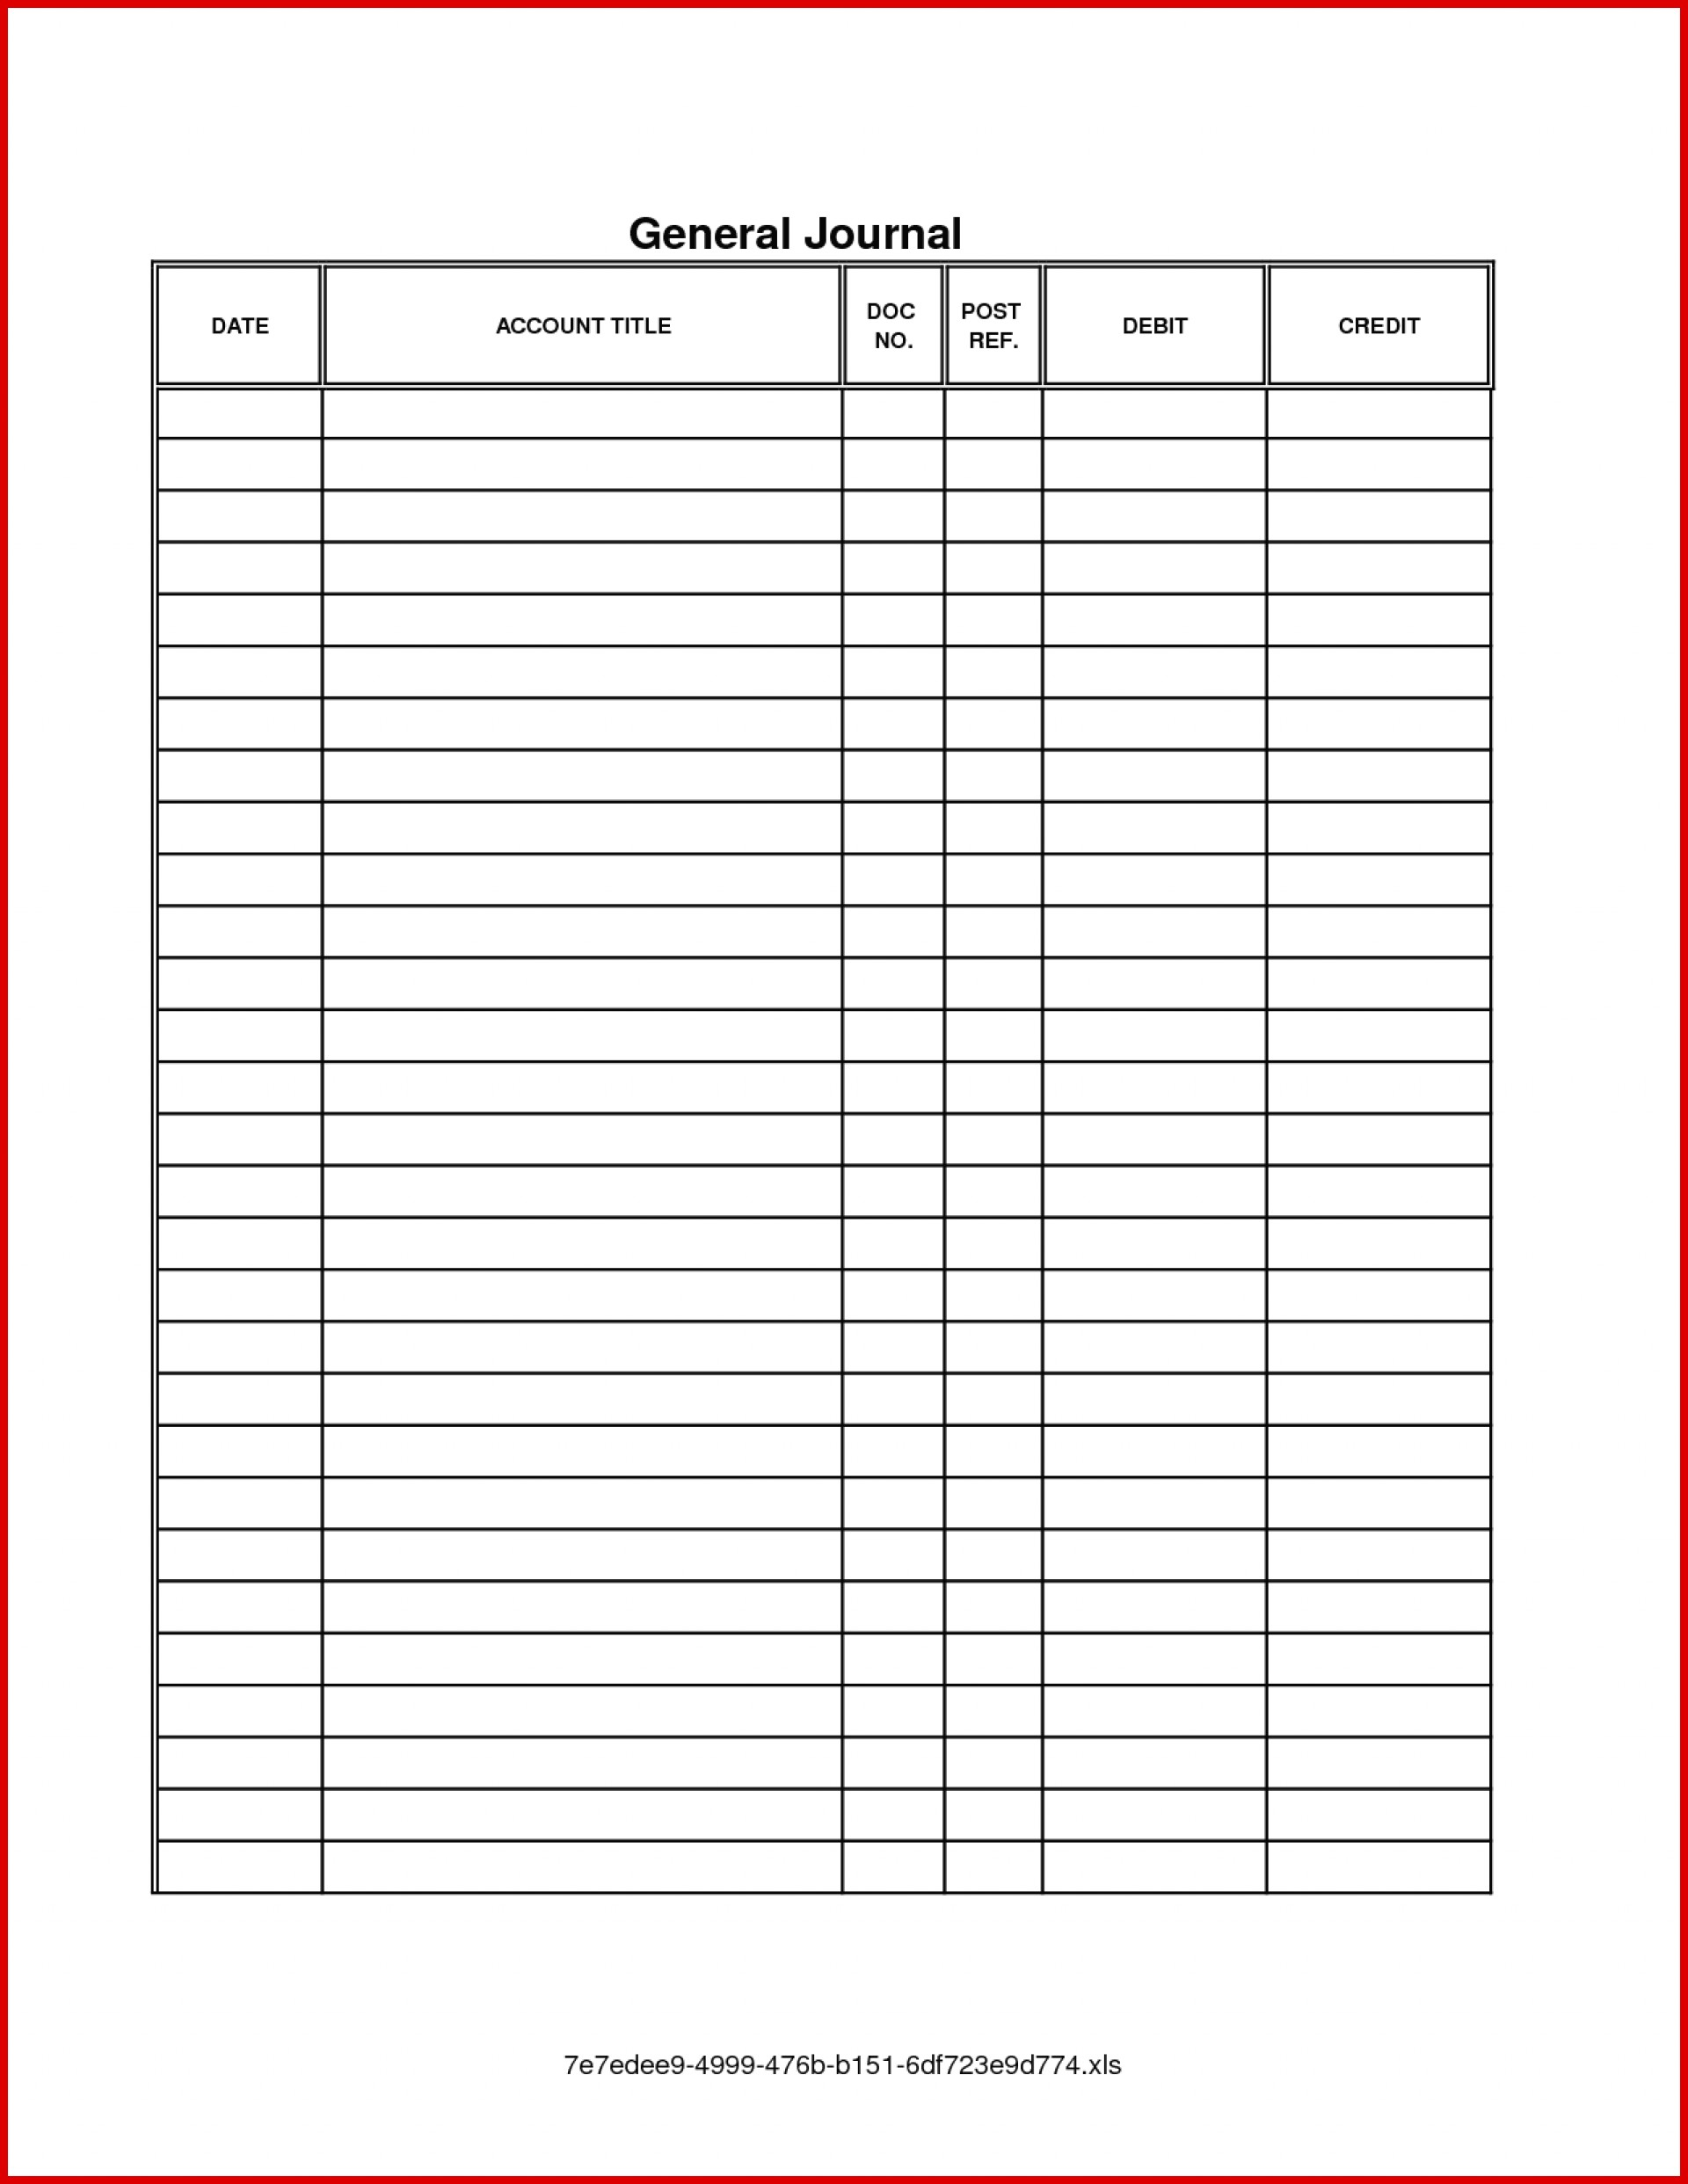 027 Accounting Journal Entry Template Excel Or Double Lovely Regarding Blank Ledger Template